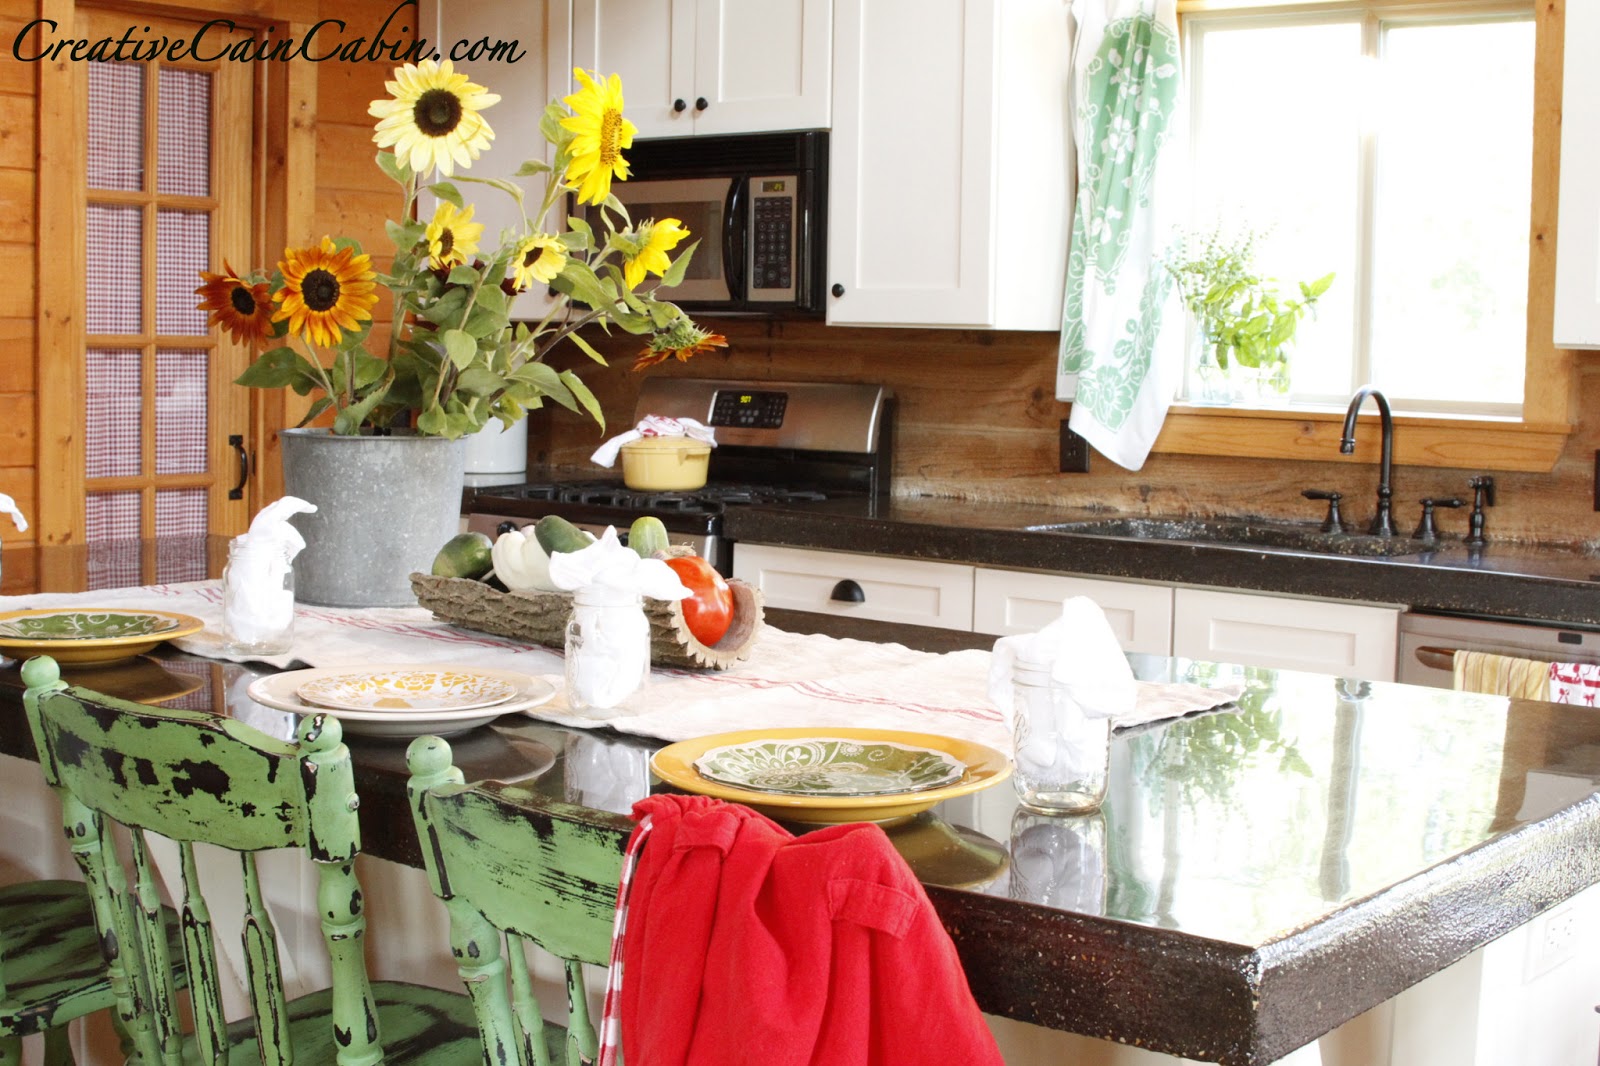 Revamp Your Kitchen with Home Depot - Creative Cain Cabin